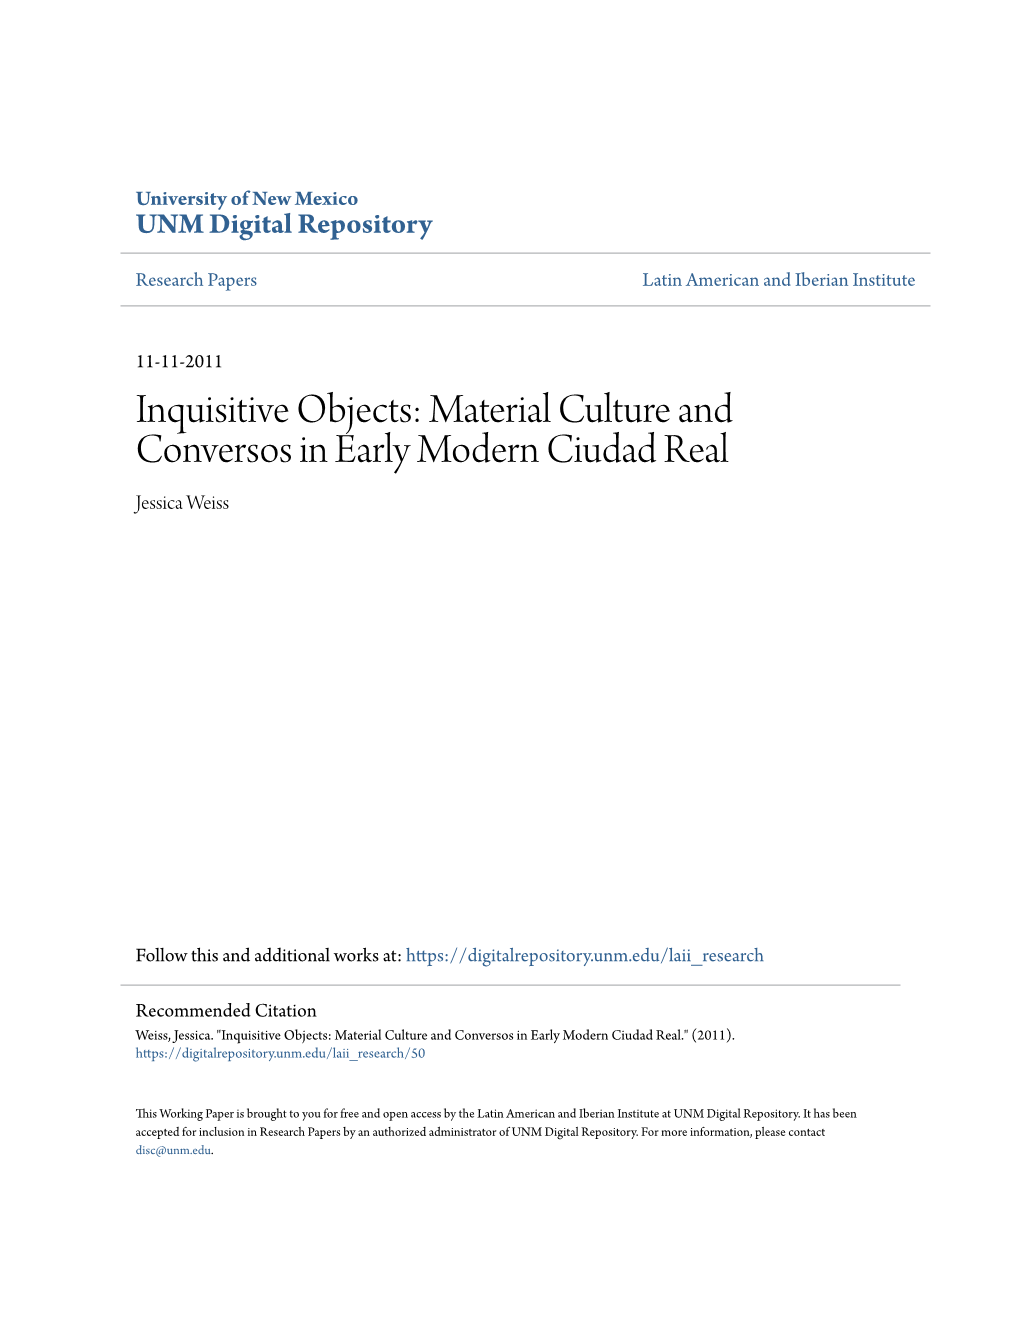 Material Culture and Conversos in Early Modern Ciudad Real Jessica Weiss